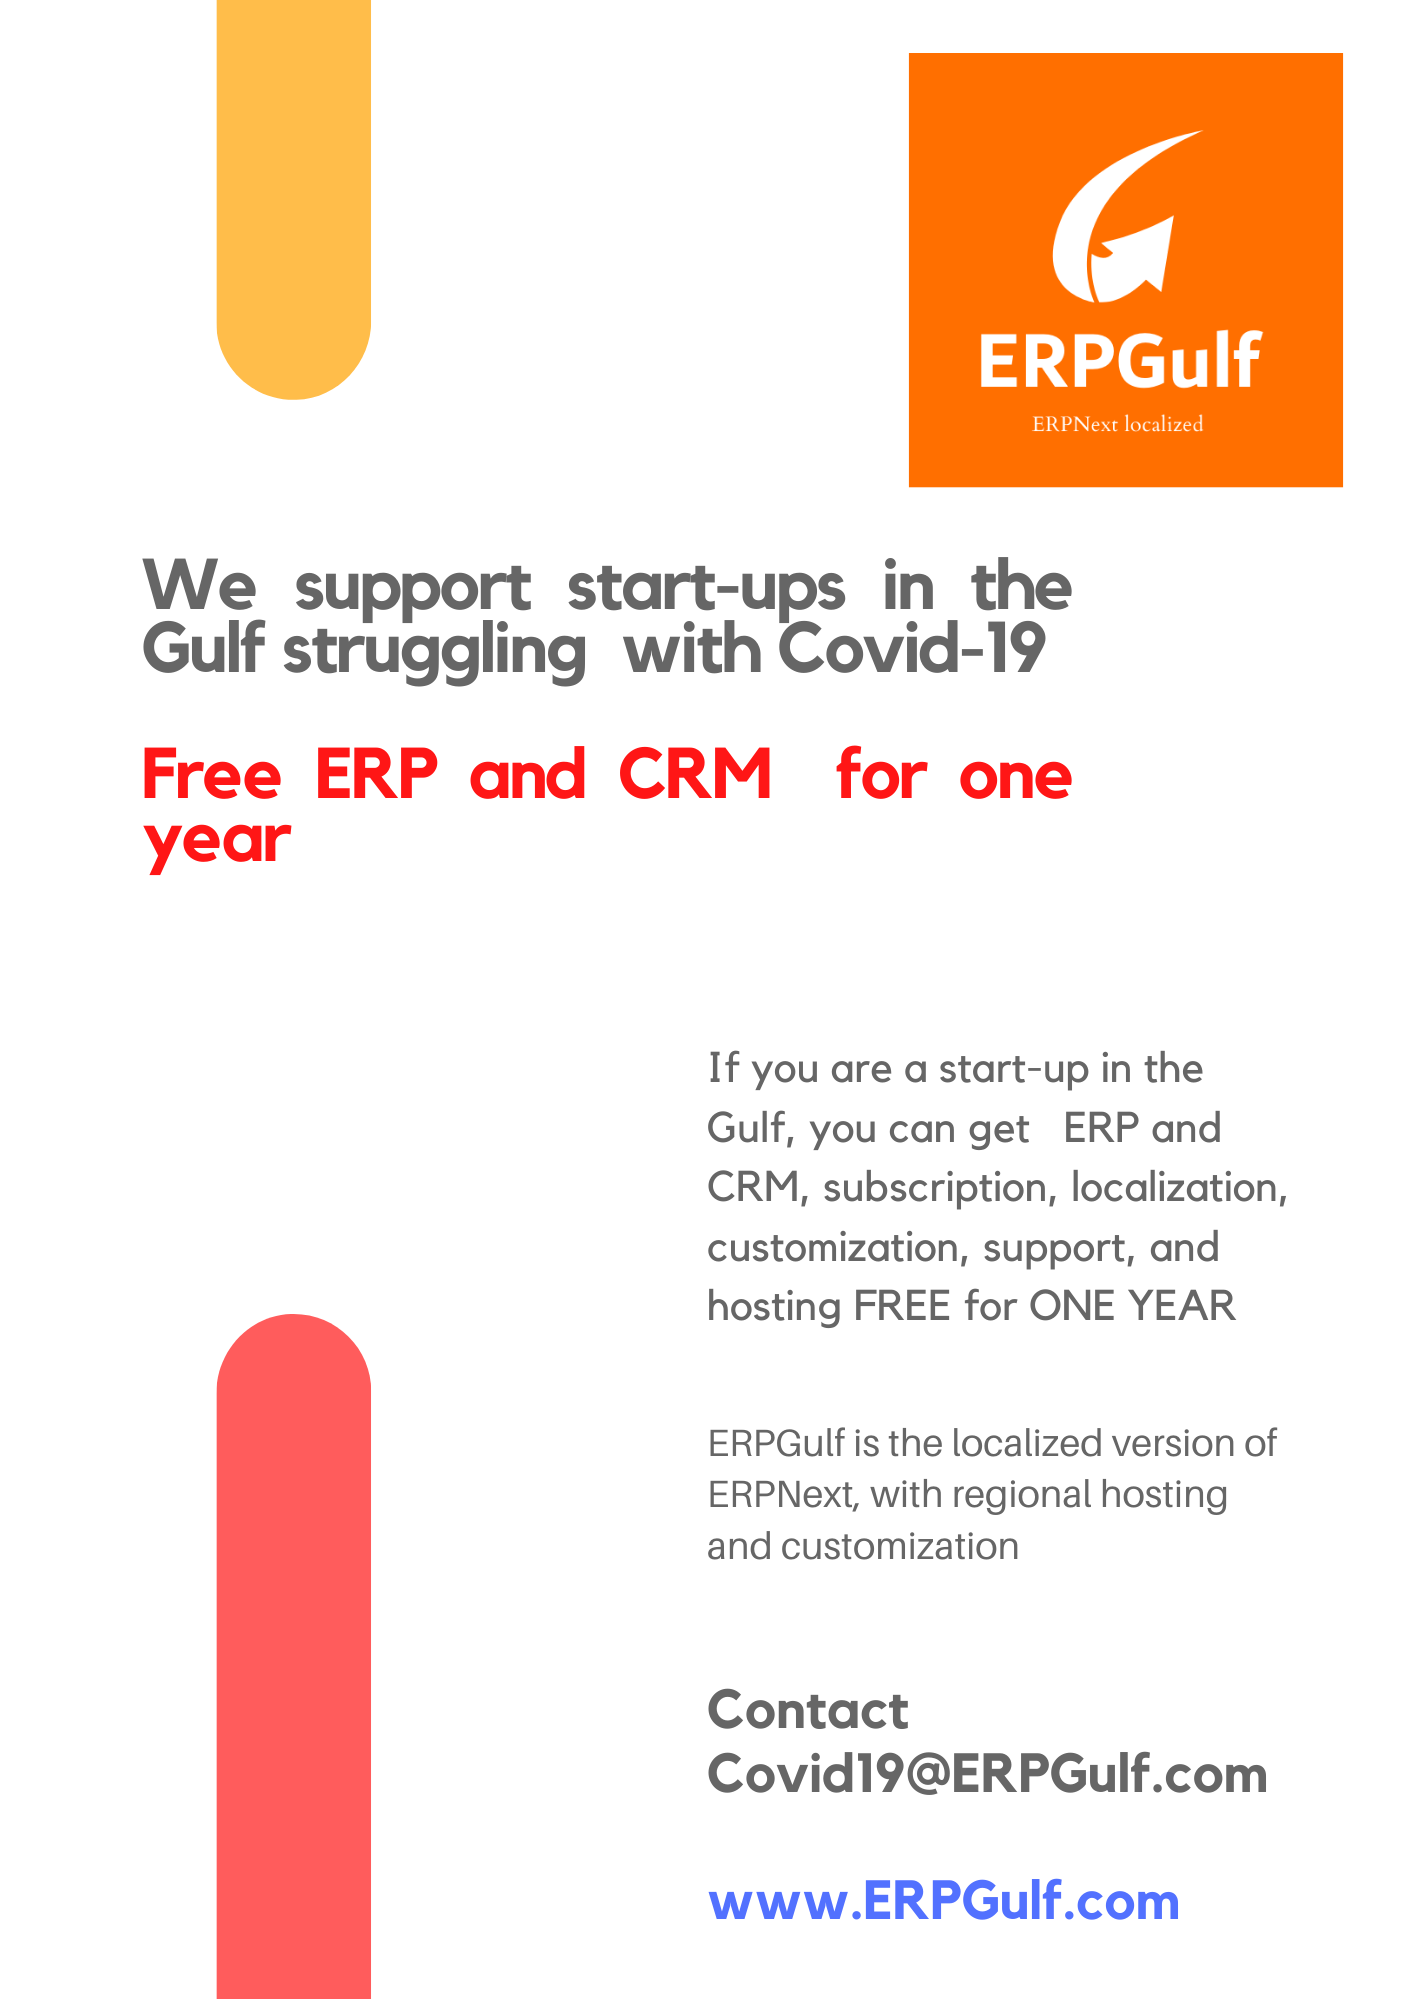 Free ERP and CRM for one year for start-ups in the Gulf struggling with Covid-19 - Cover Image